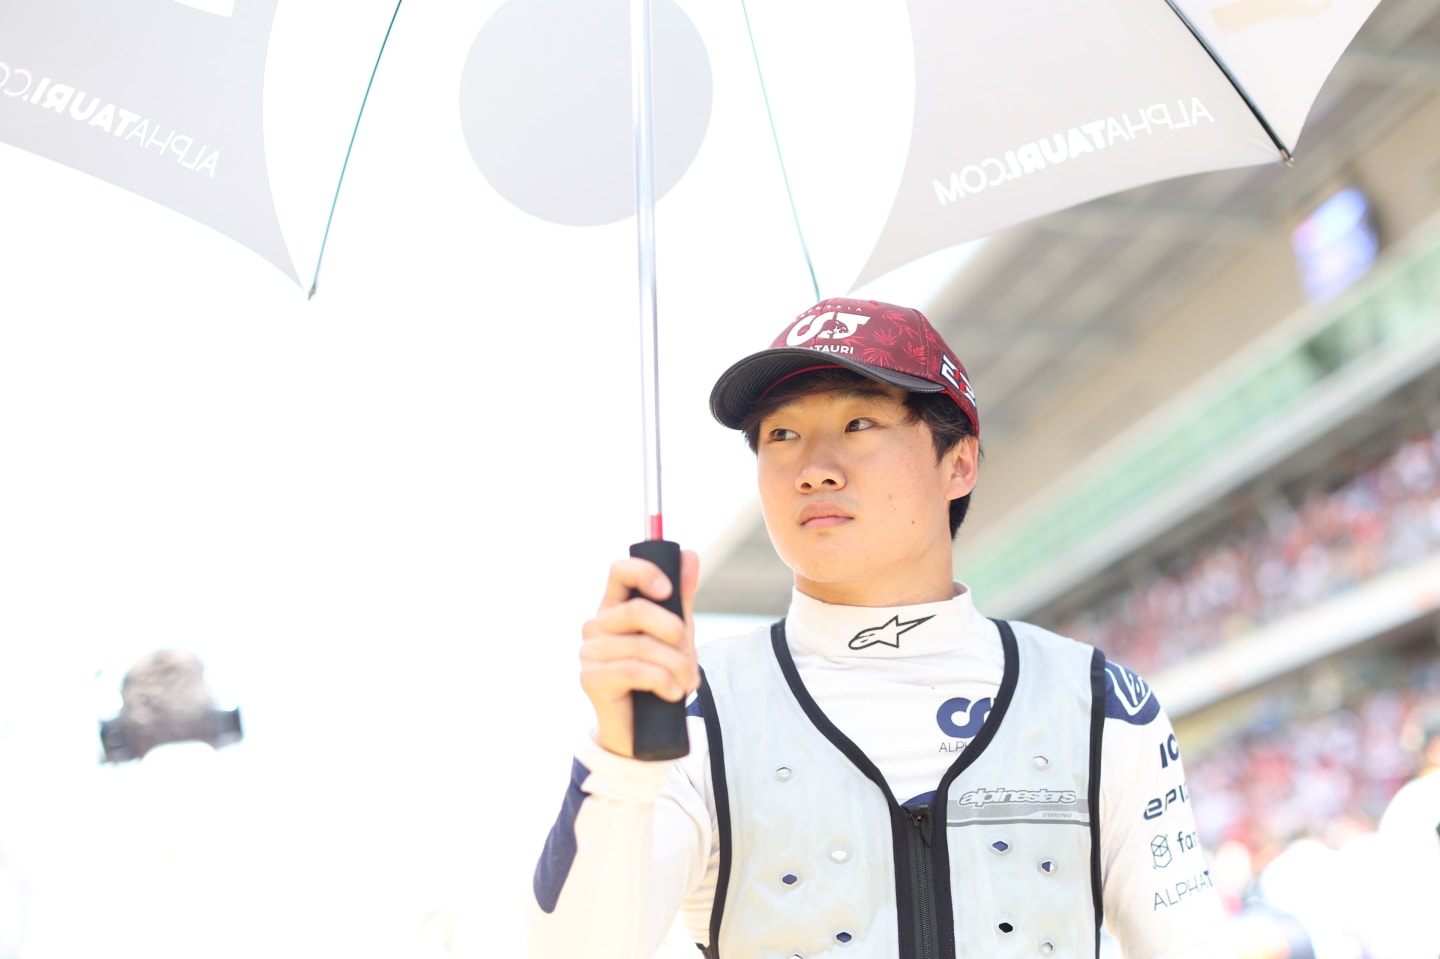 BARCELONA, SPAIN - MAY 22: Yuki Tsunoda of Japan and Scuderia AlphaTauri prepares to drive on the grid during the F1 Grand Prix of Spain at Circuit de Barcelona-Catalunya on May 22, 2022 in Barcelona, Spain. (Photo by Peter Fox/Getty Images)